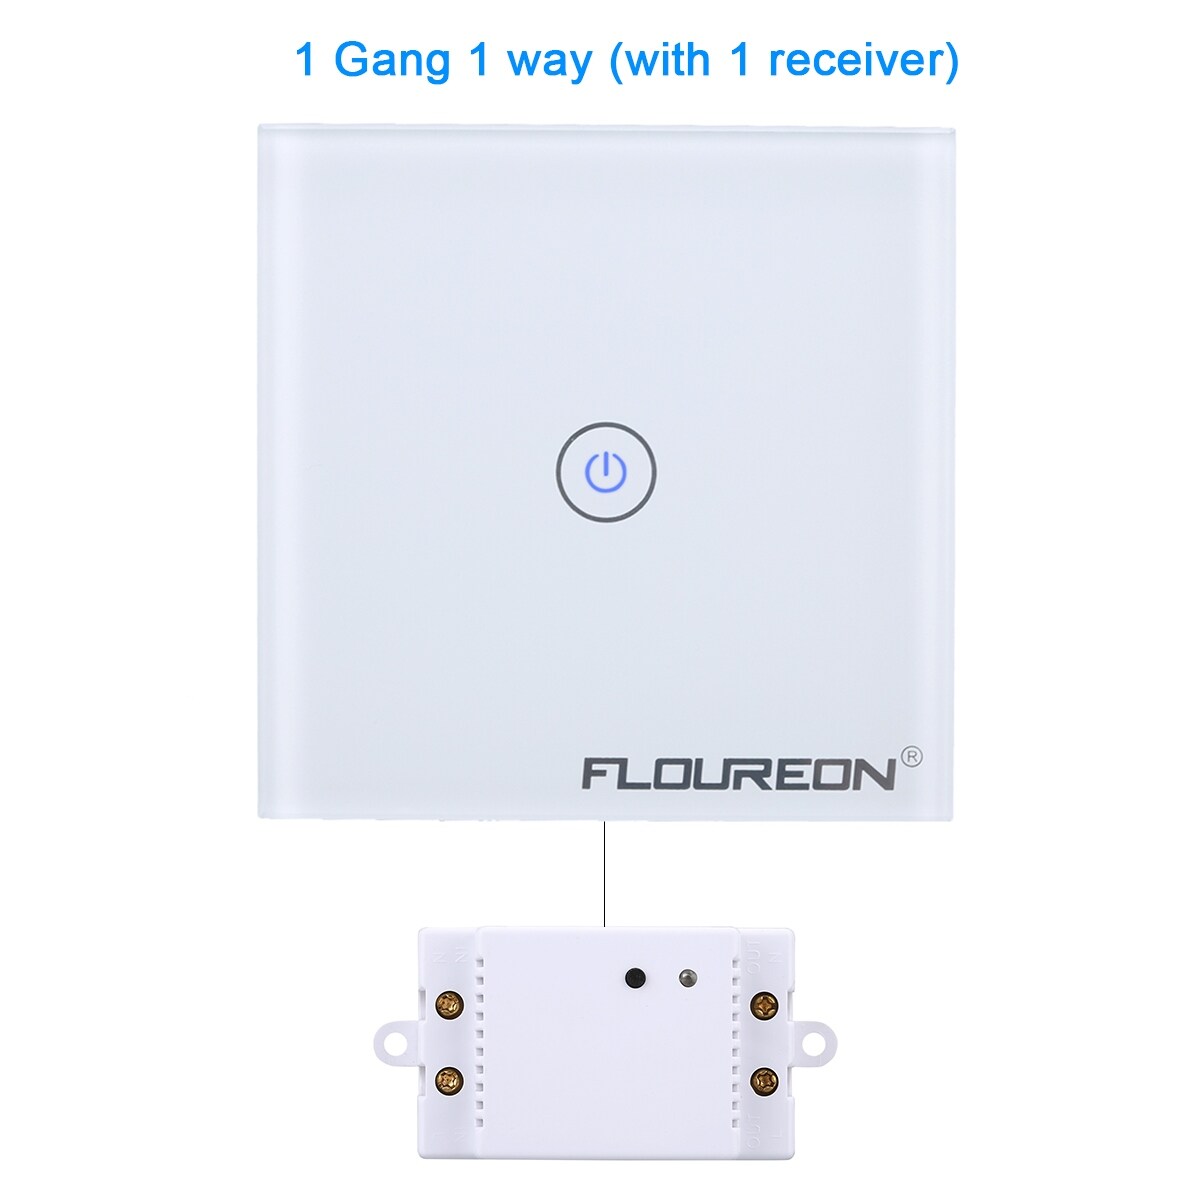 https://ak1.ostkcdn.com/images/products/is/images/direct/2cc31f733f1338786b47c98235cccb21c4ad4c2c/Floureon-1-Gang-1-way-Wireless-Remote-Control-Light-Switch-Free-Remote-Control-White-Crystal-Glass-Panel.jpg